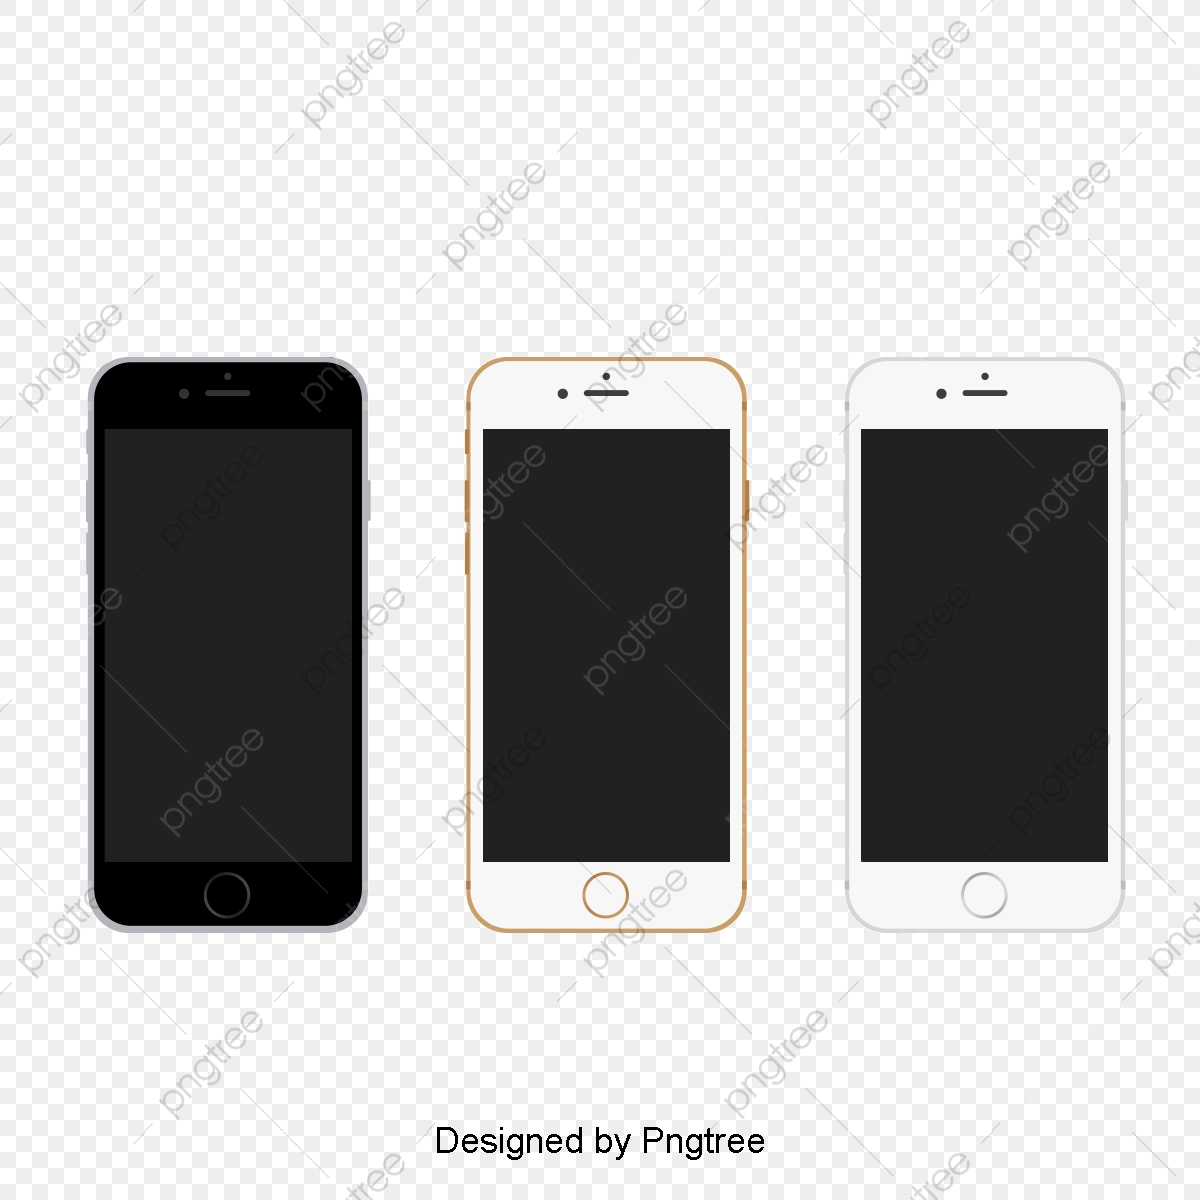 The Color Of Iphone8, Apple, Mobile Phone, Iphone PNG Transparent.